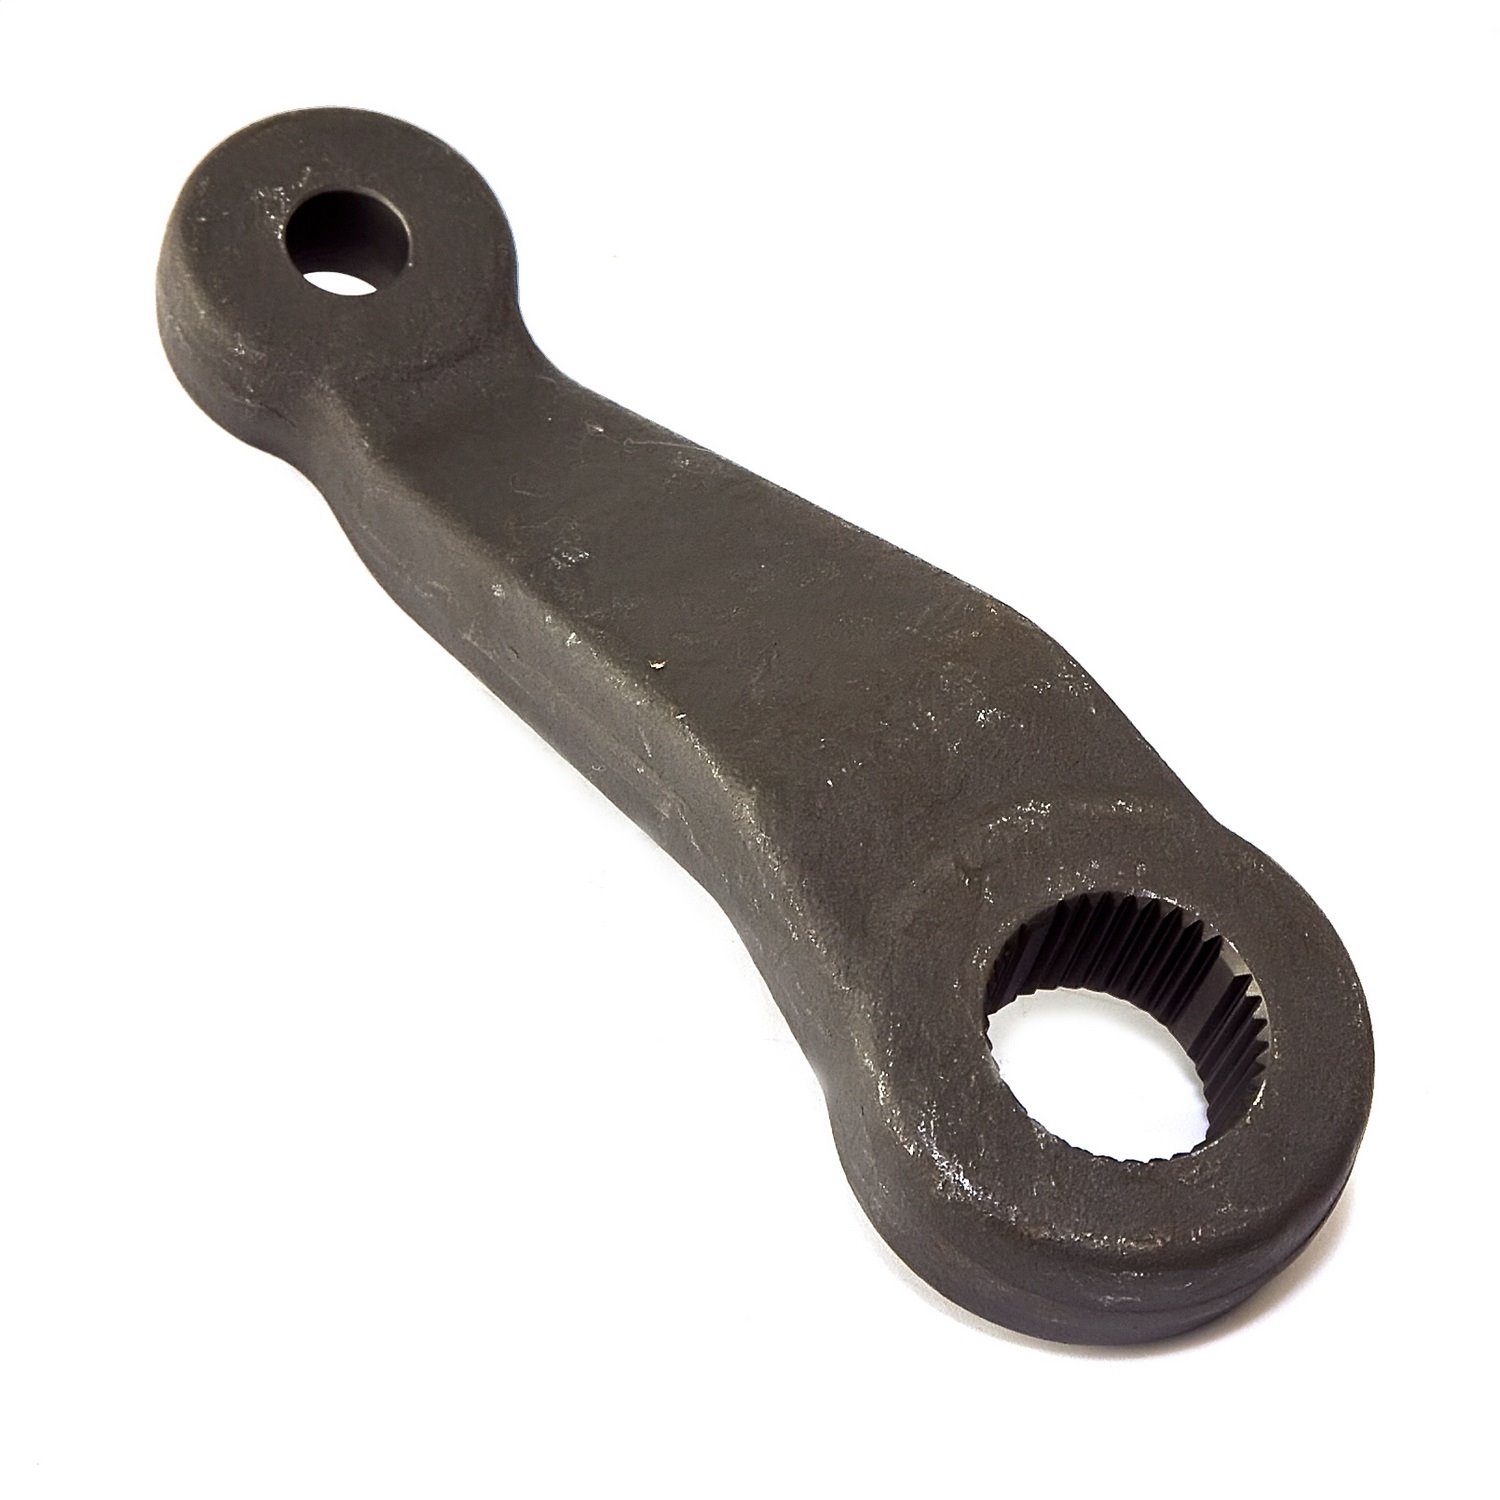 Replacement pitman arm from Omix-ADA, Fits 87-95 Jeep Wrangler YJ with manual steering.